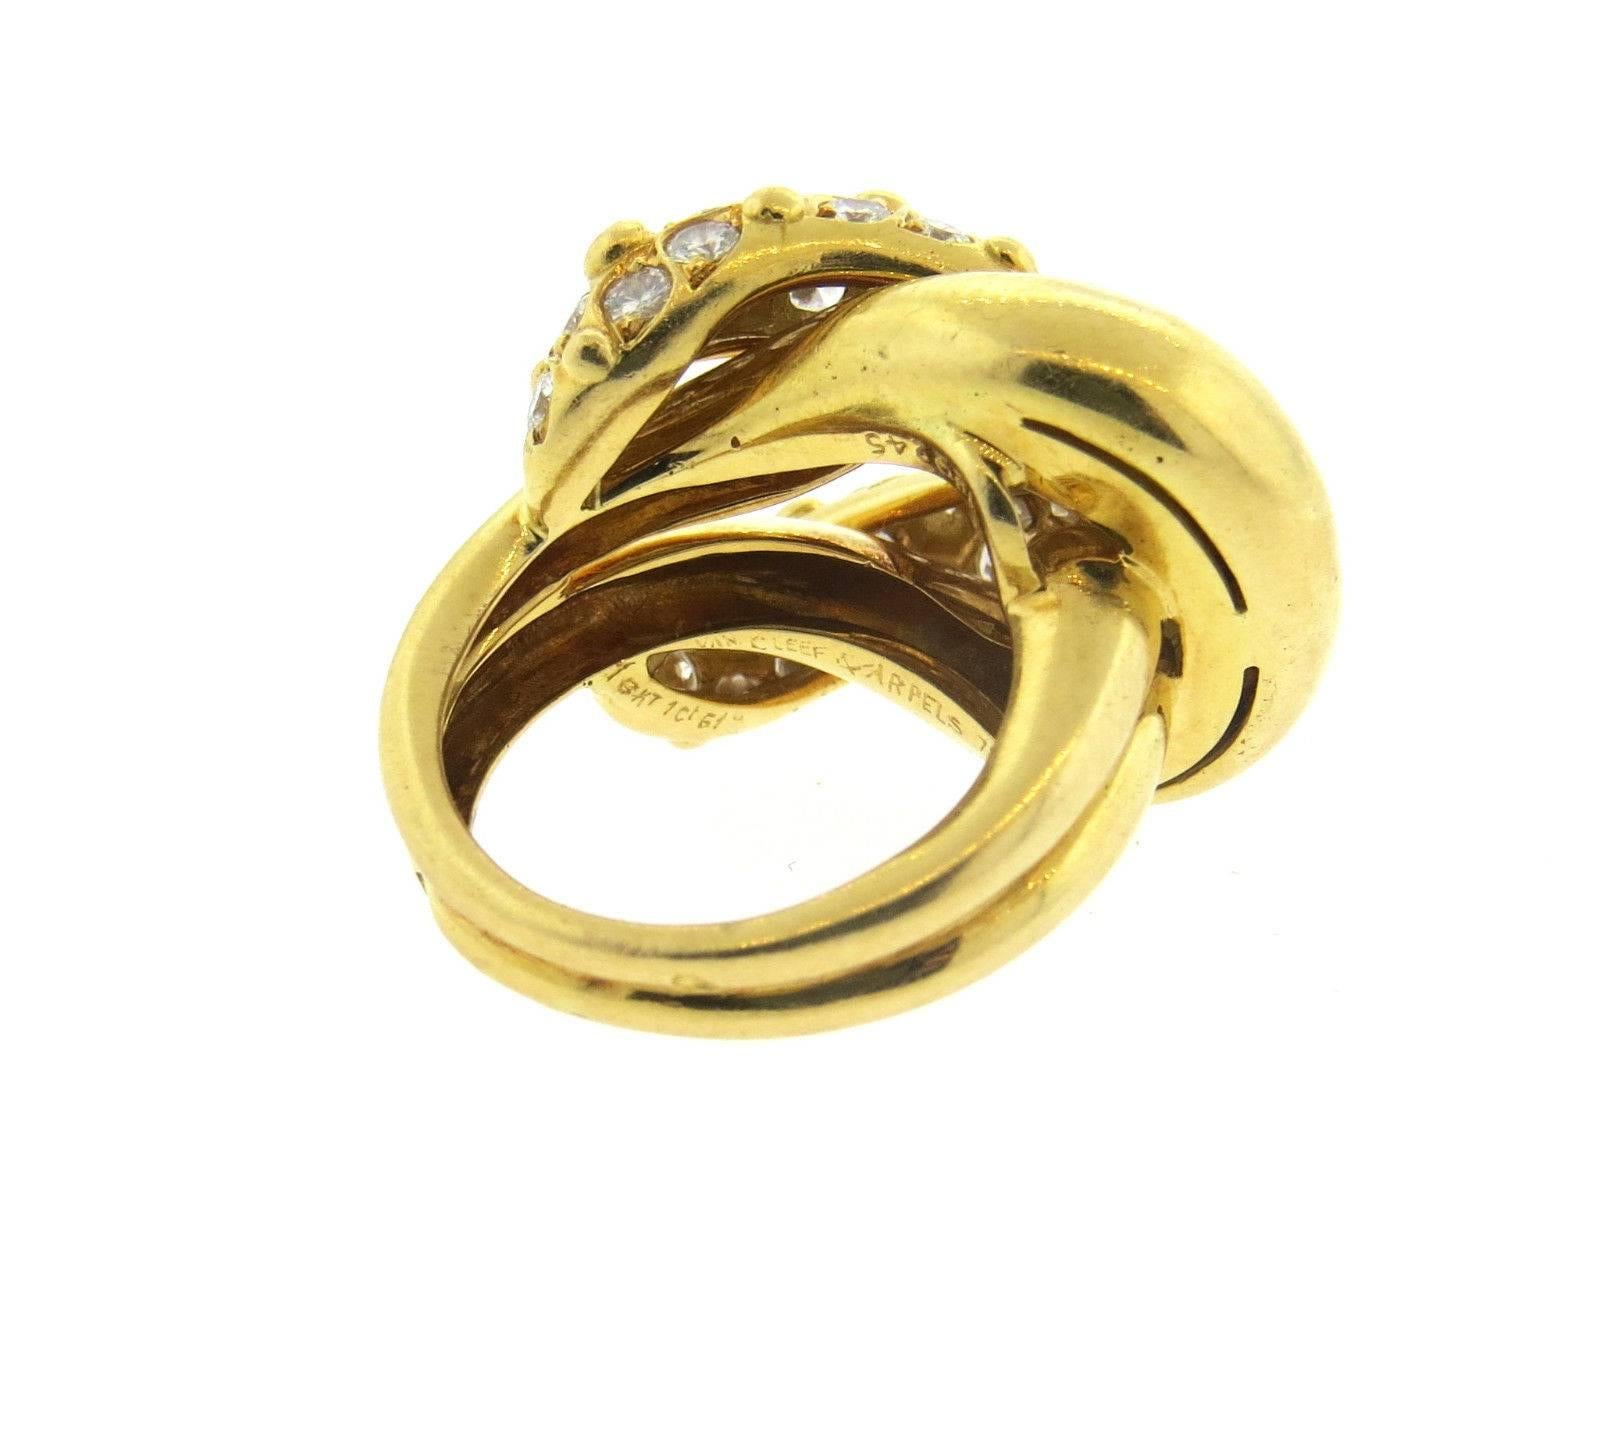 Van Cleef & Arpels Diamond Gold Knot Ring In Excellent Condition For Sale In Lambertville, NJ